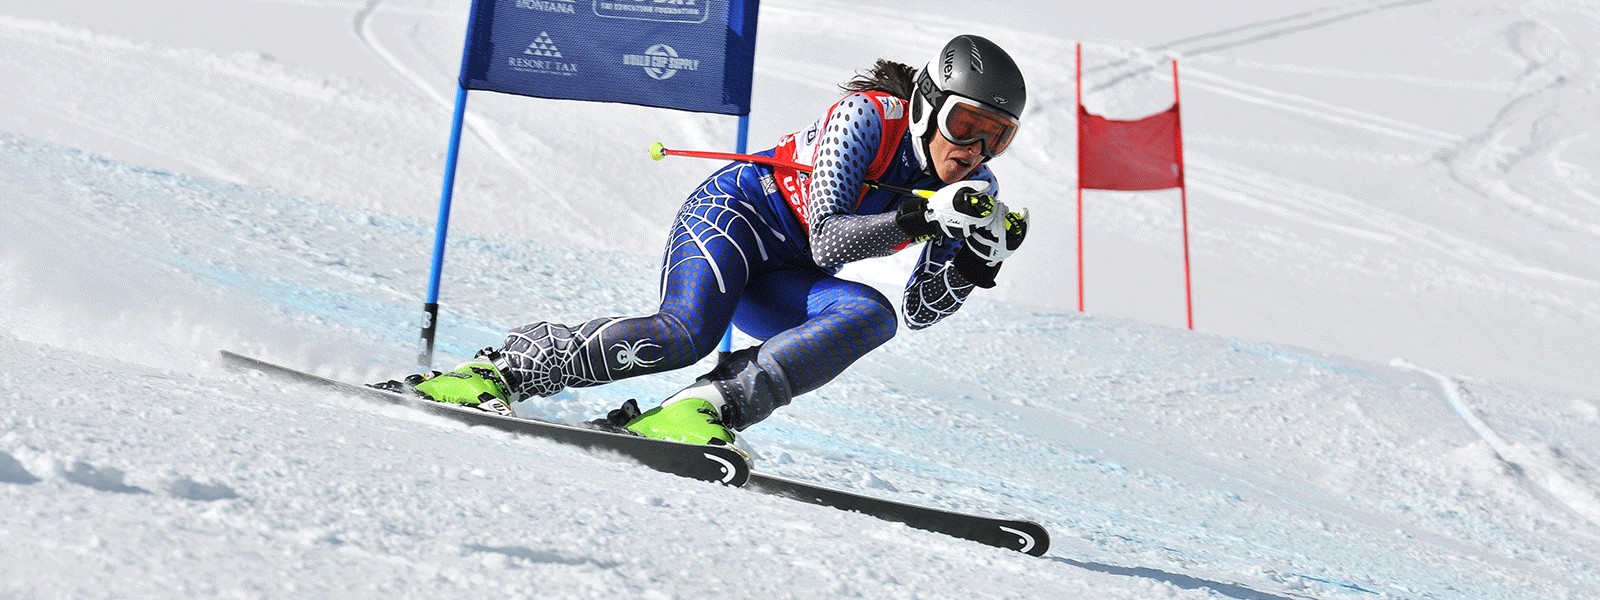 Lisa Densmore Ballard races to first overall in super-G at the 2016 U.S. Alpine Masters Championships on 33m-radius super G skis.